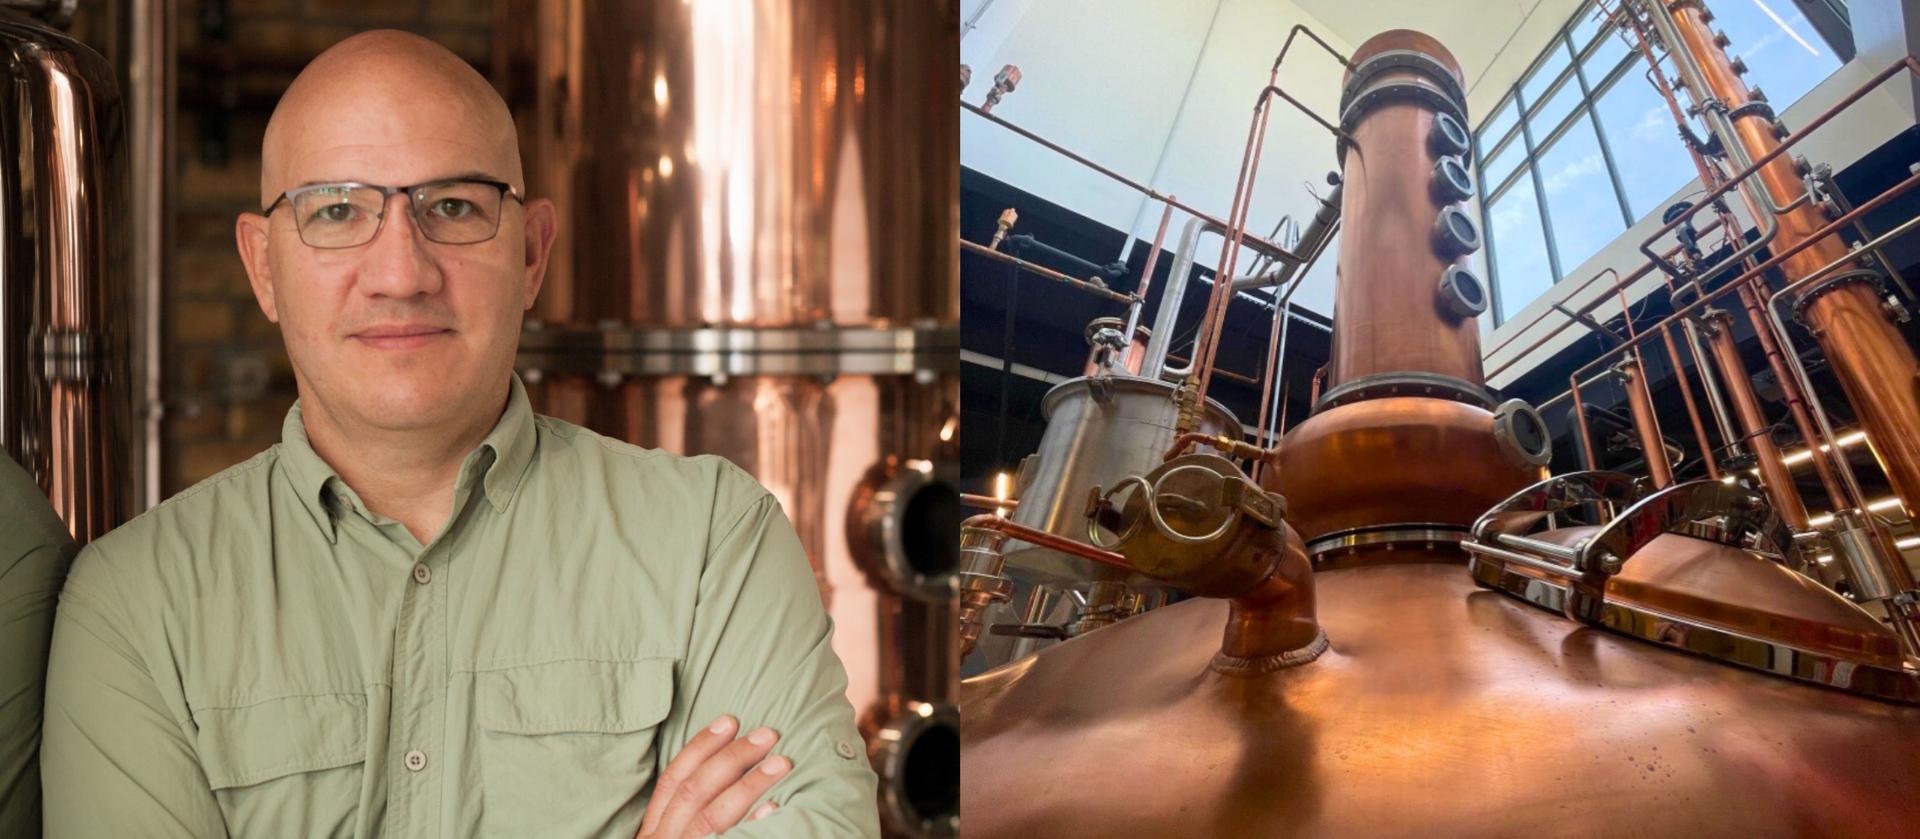 Photo for: Know Your Distillers: Matt Greif